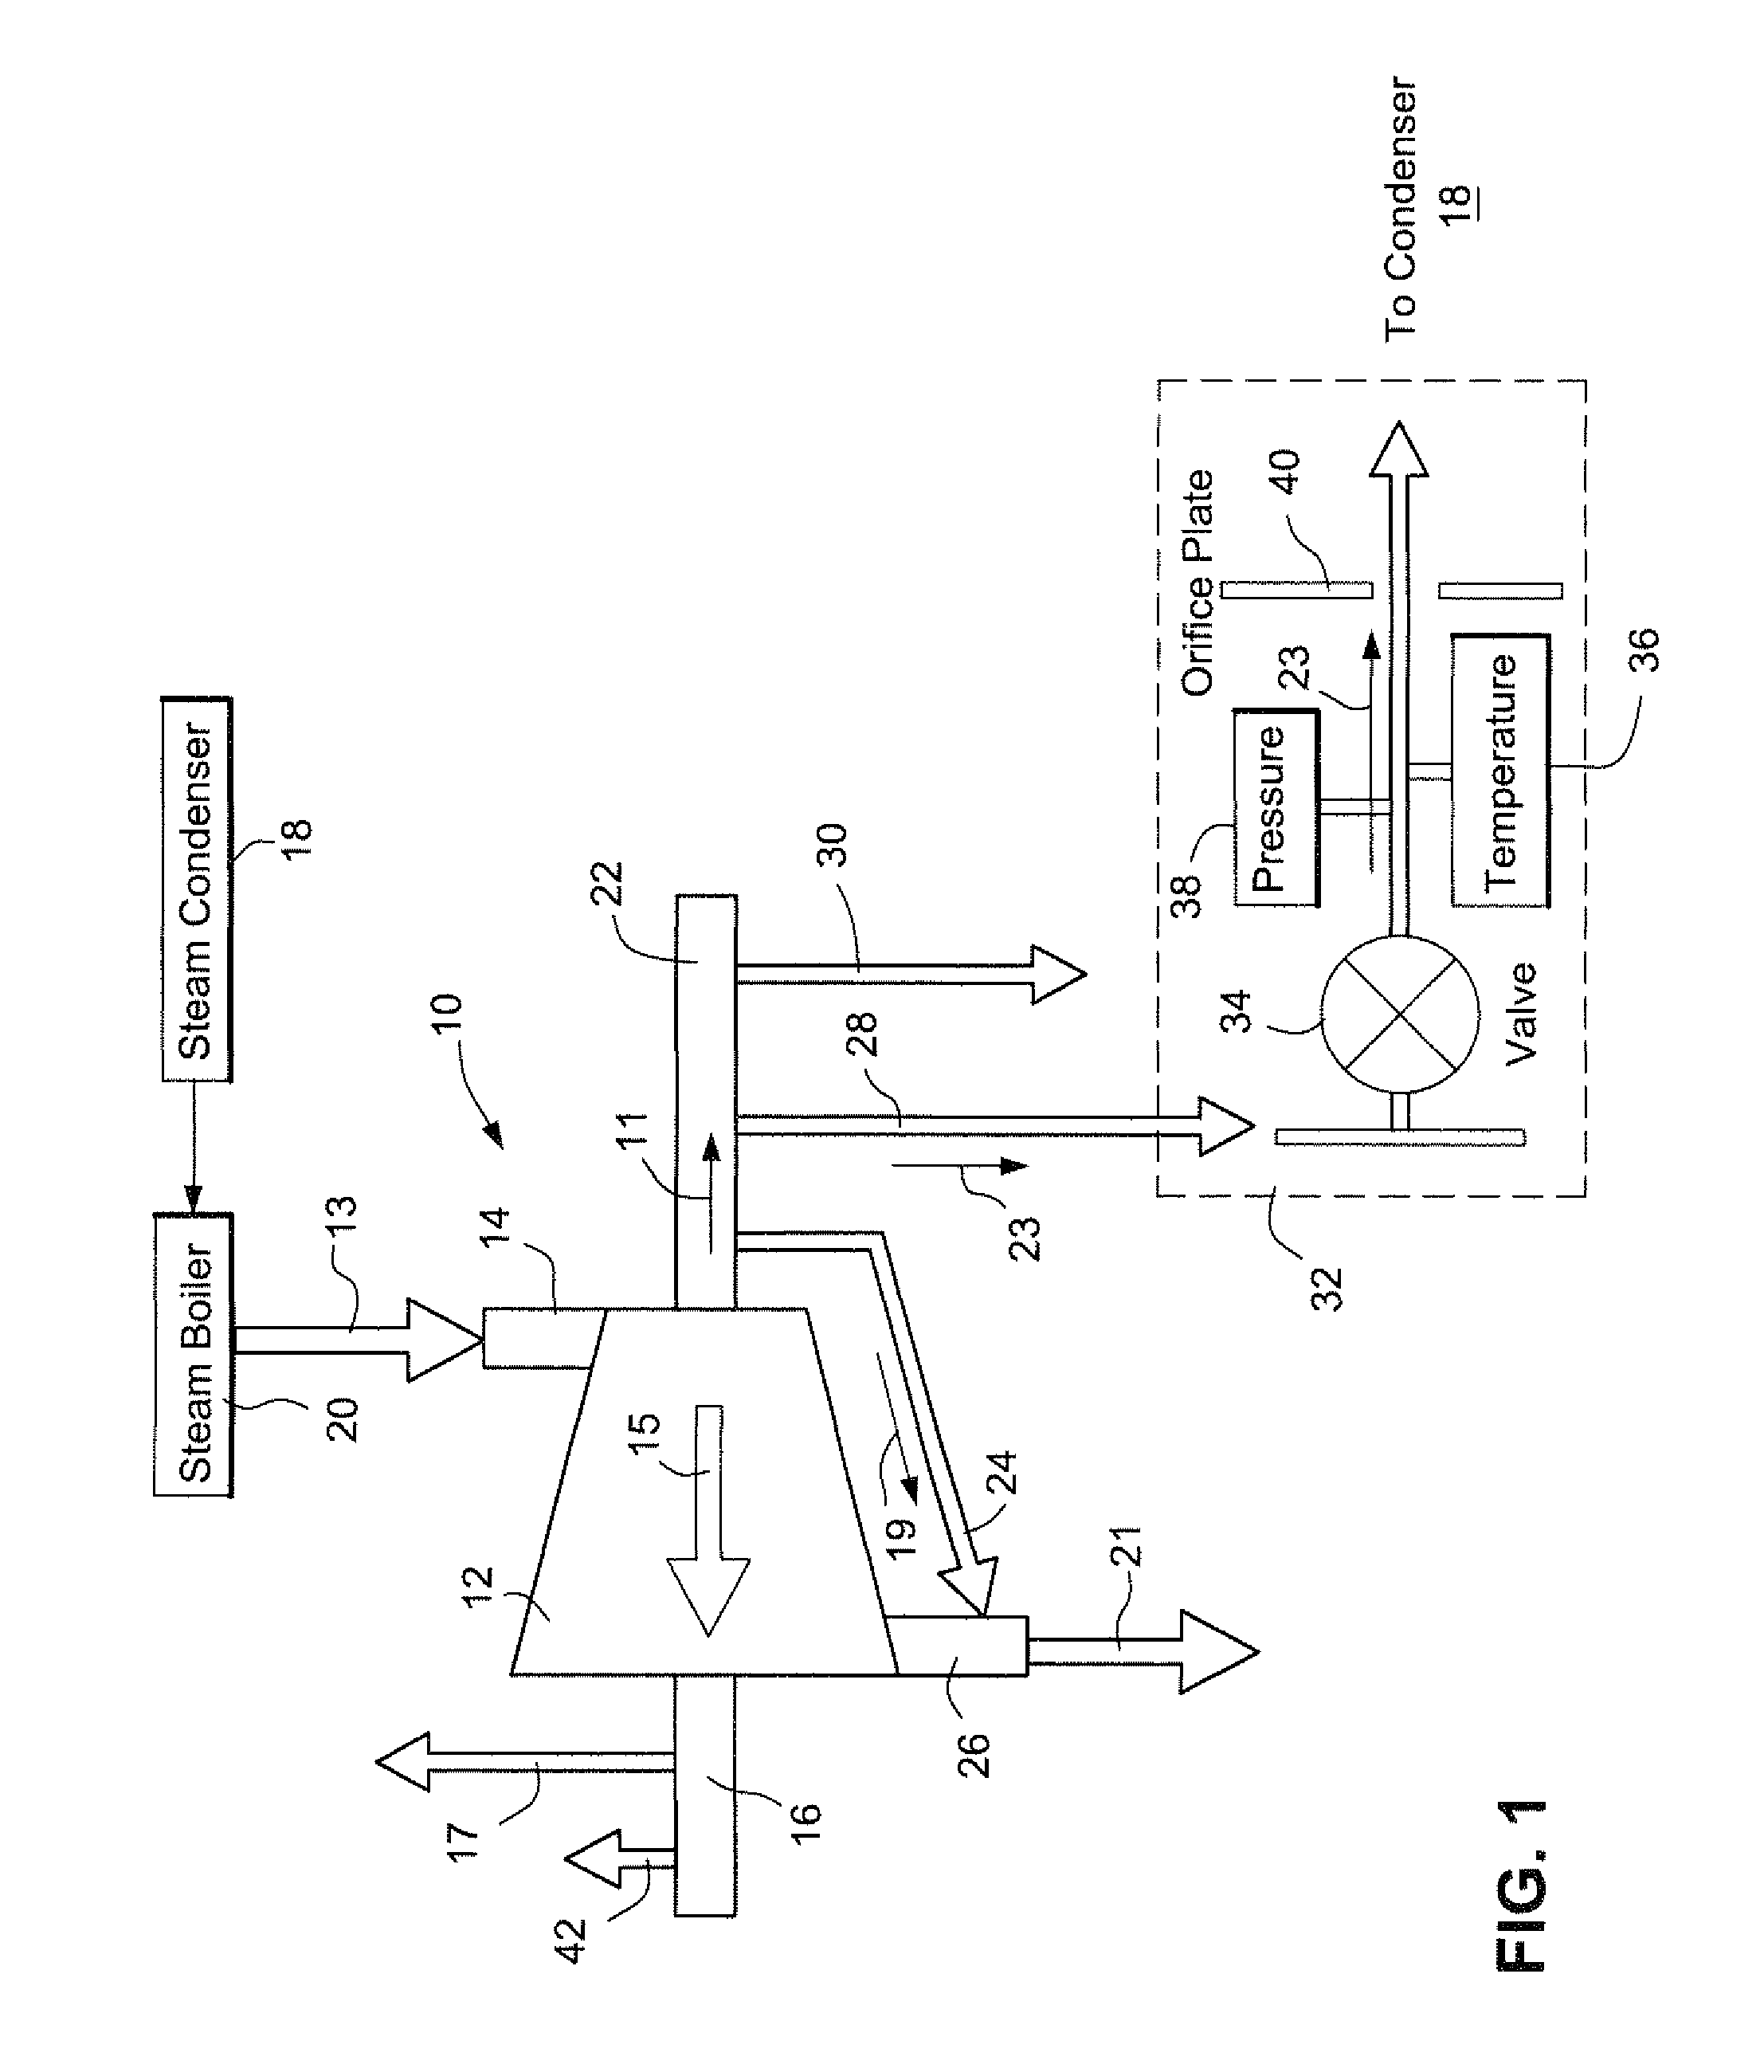 Method for determining steampath efficiency of a steam turbine section with internal leakage